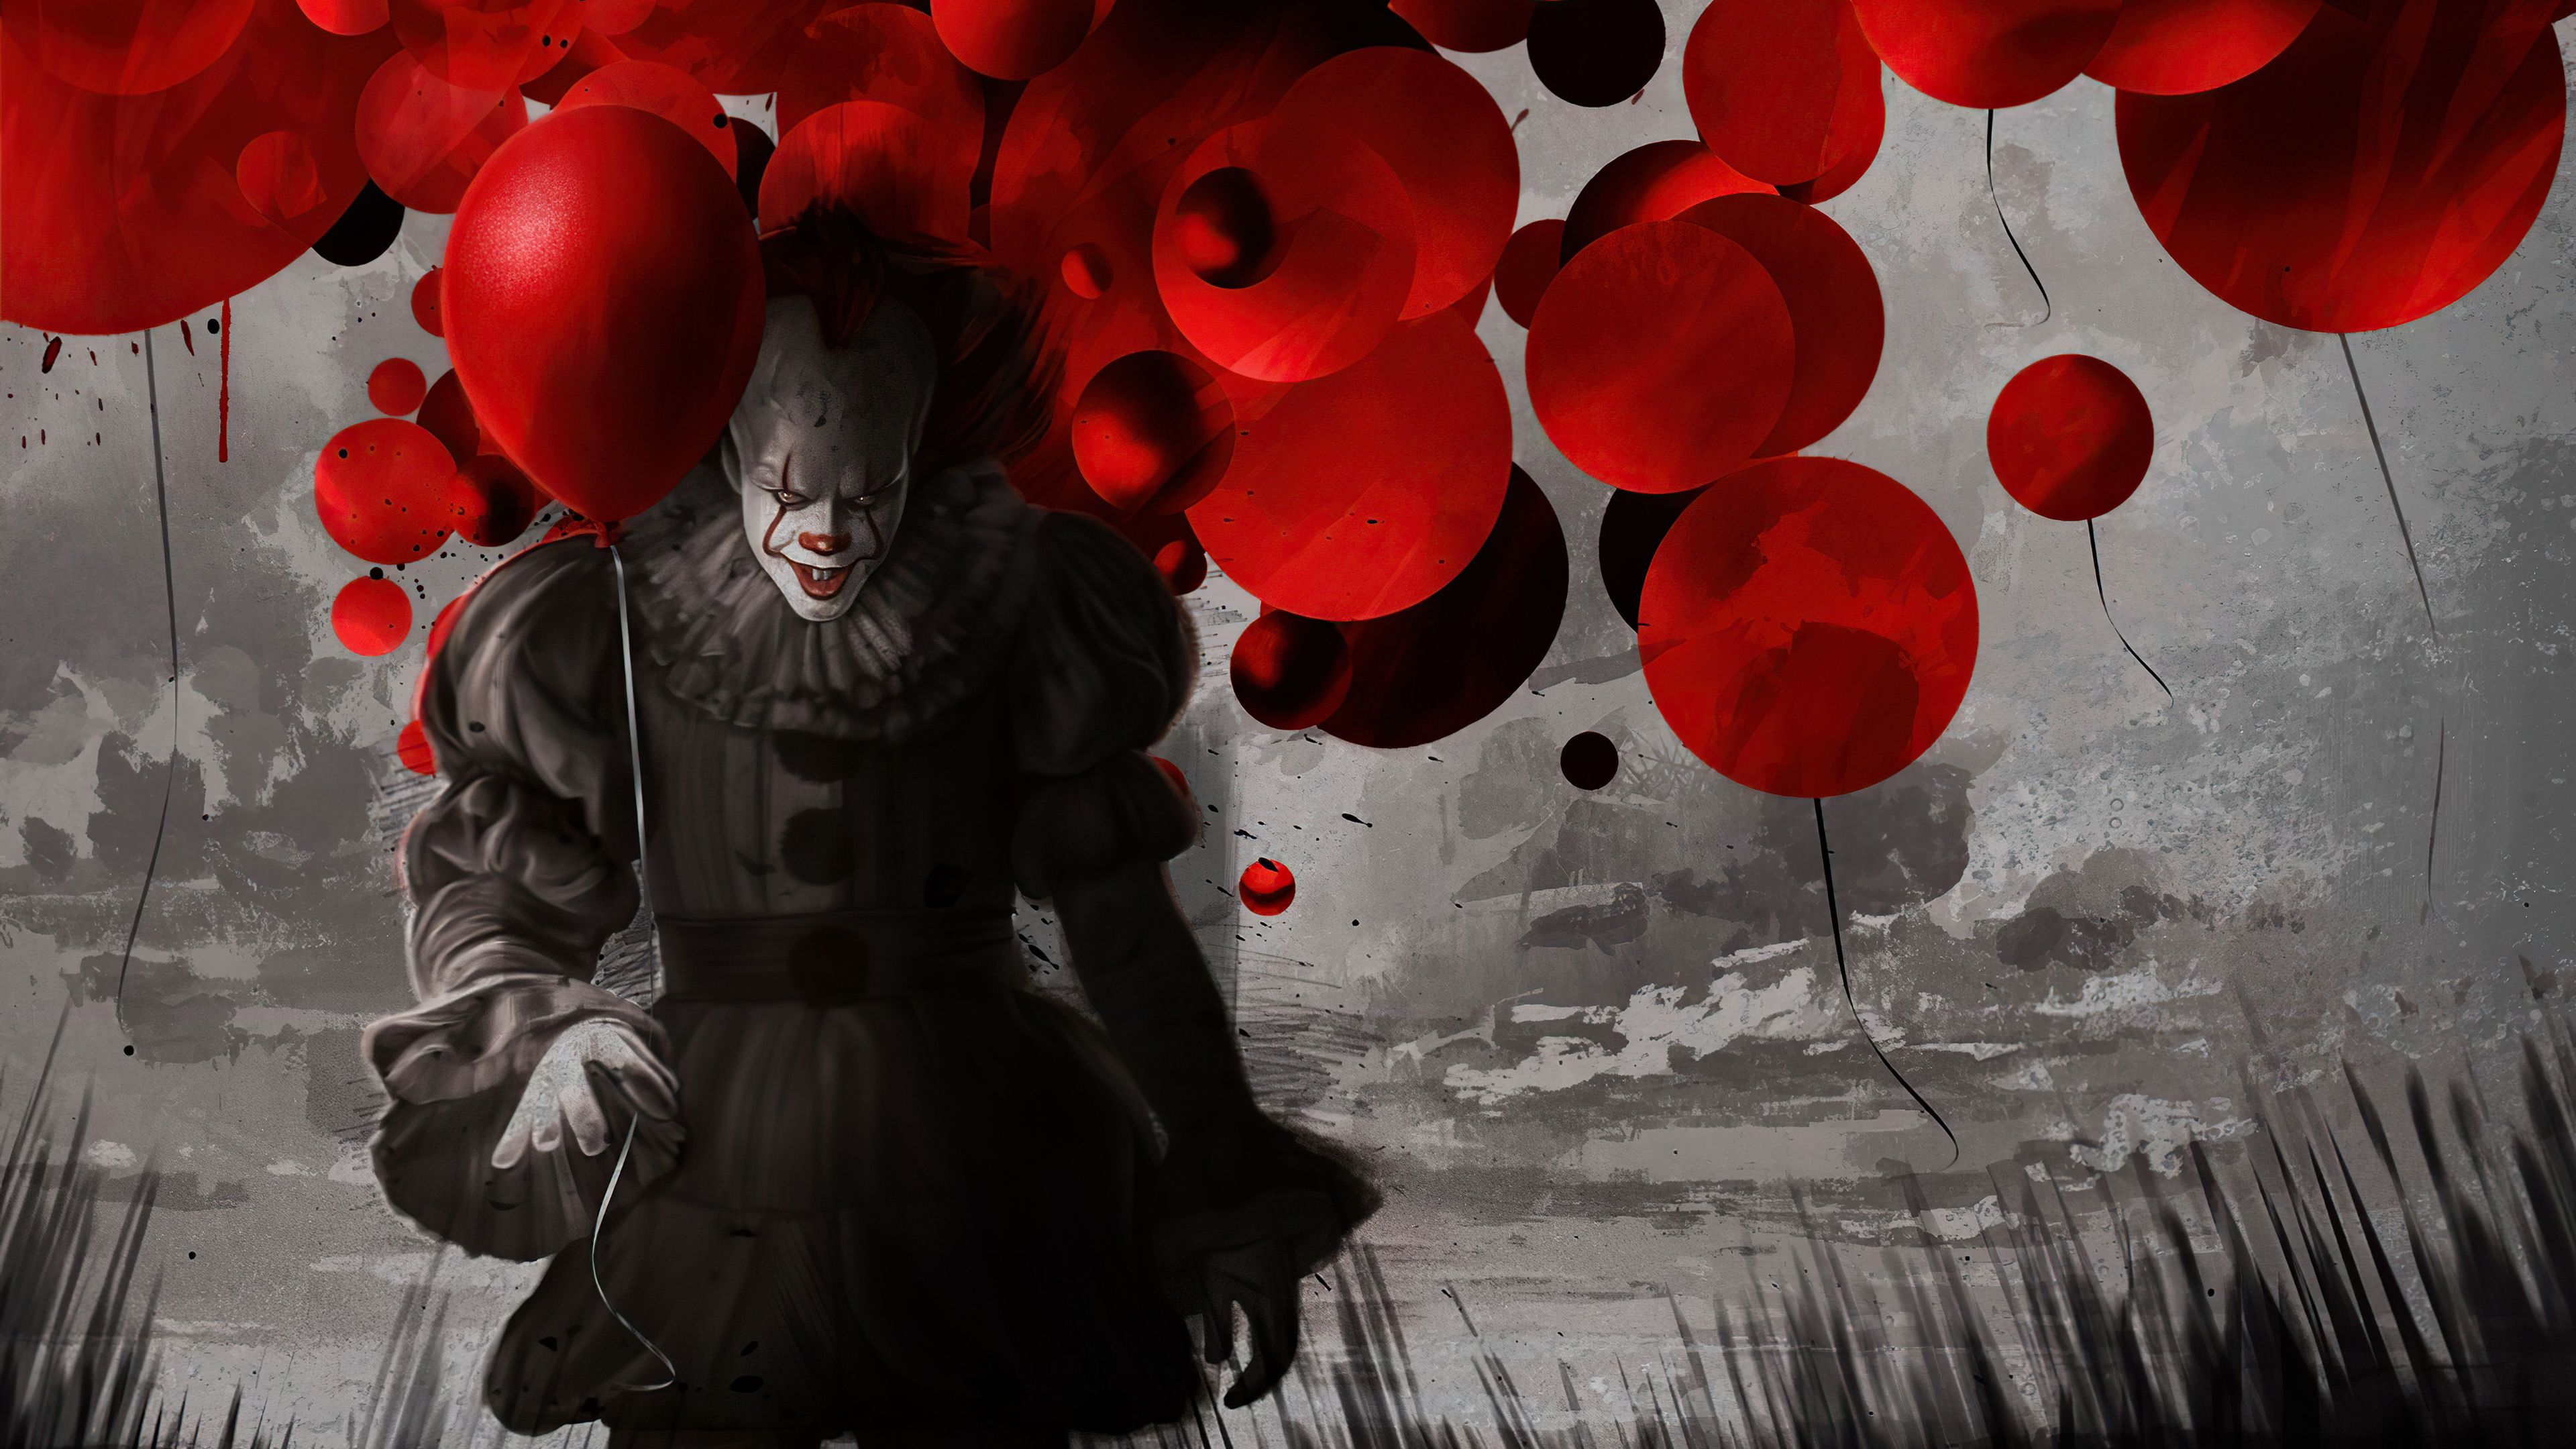 Pennywise the clown from it 2017 wallpaper 1920x1080 - Clown